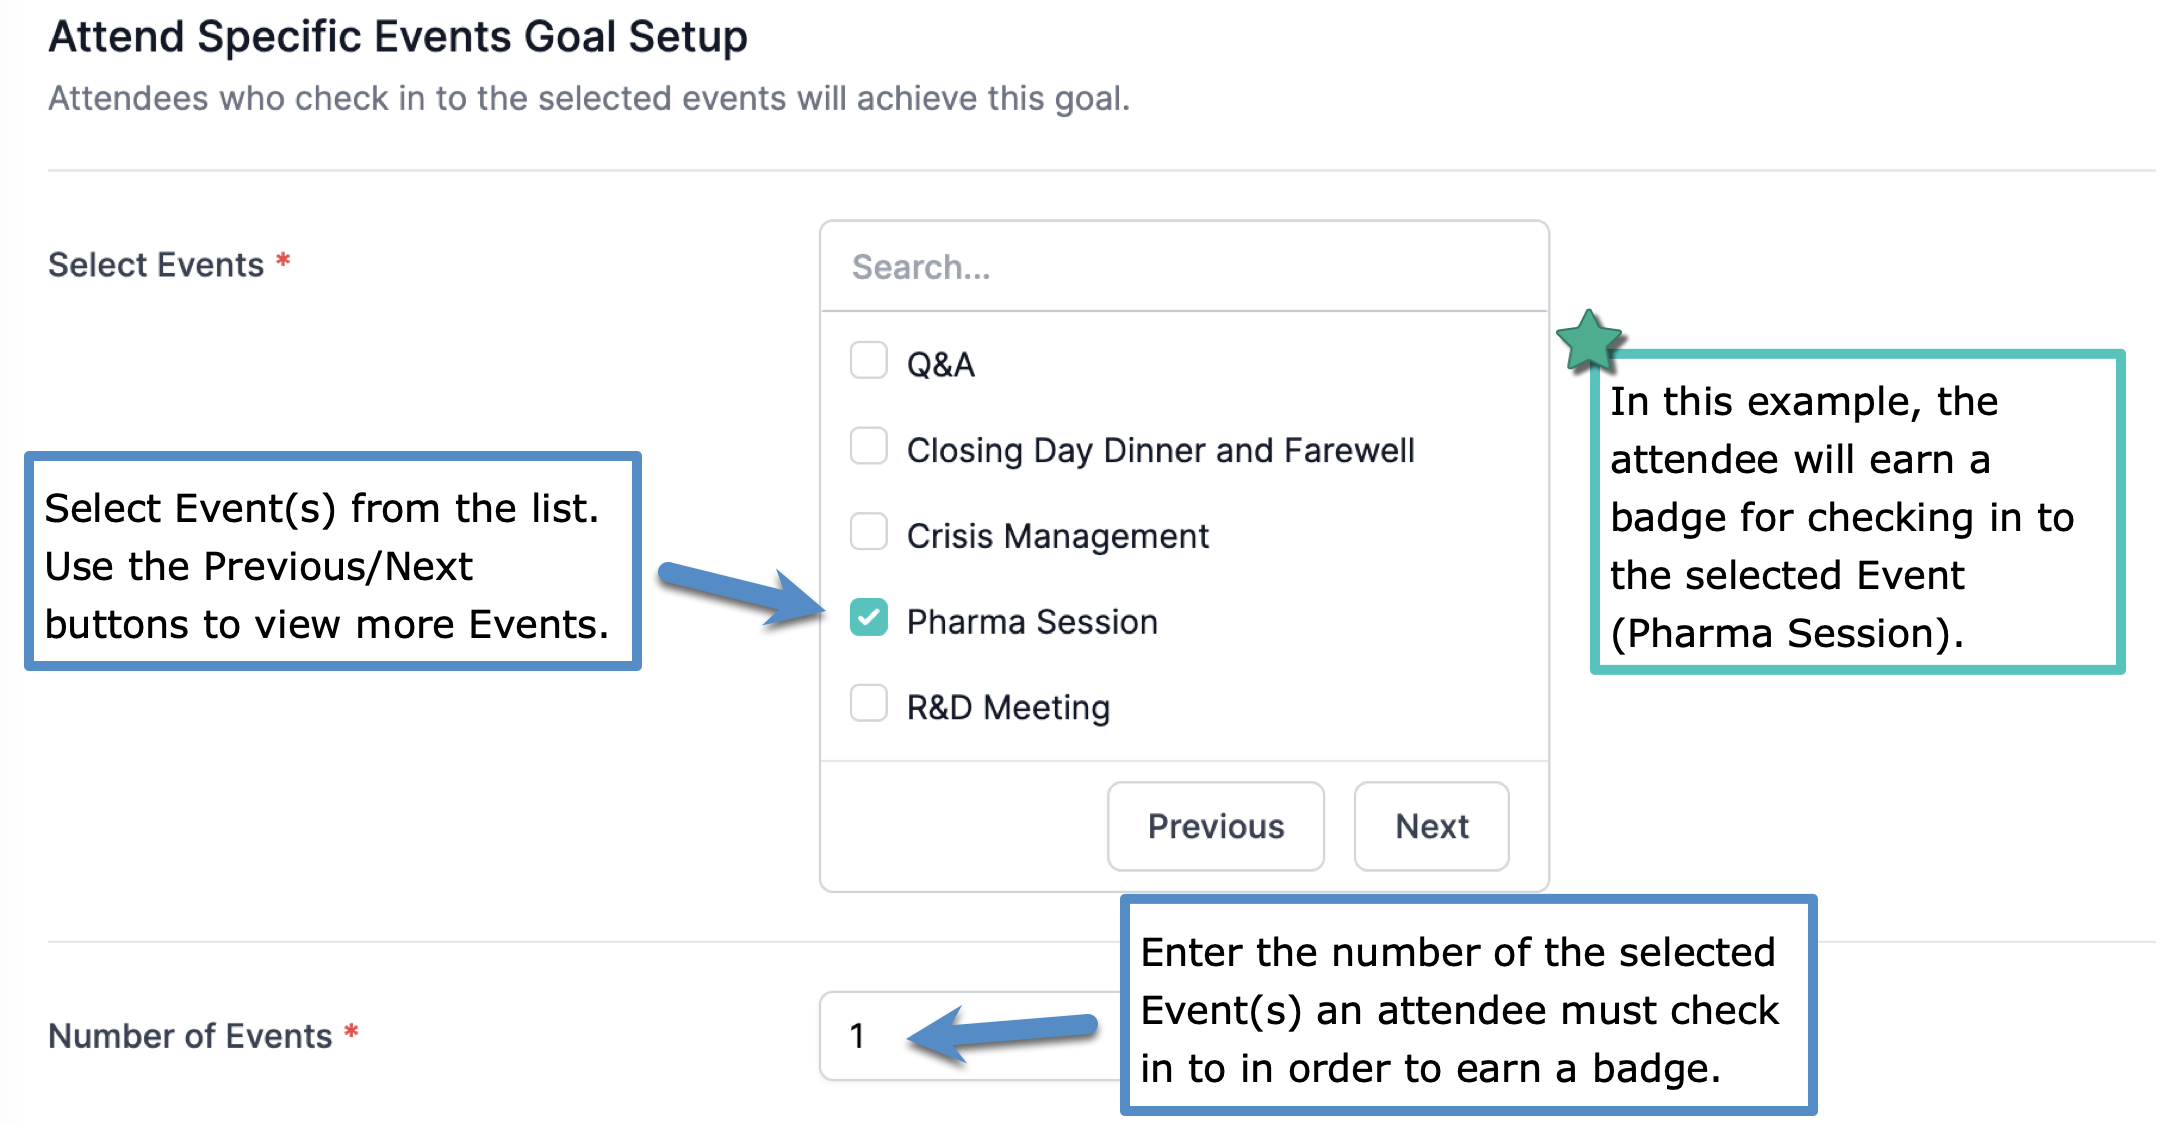 Attend_Specific_Events_Goal_Setup.png